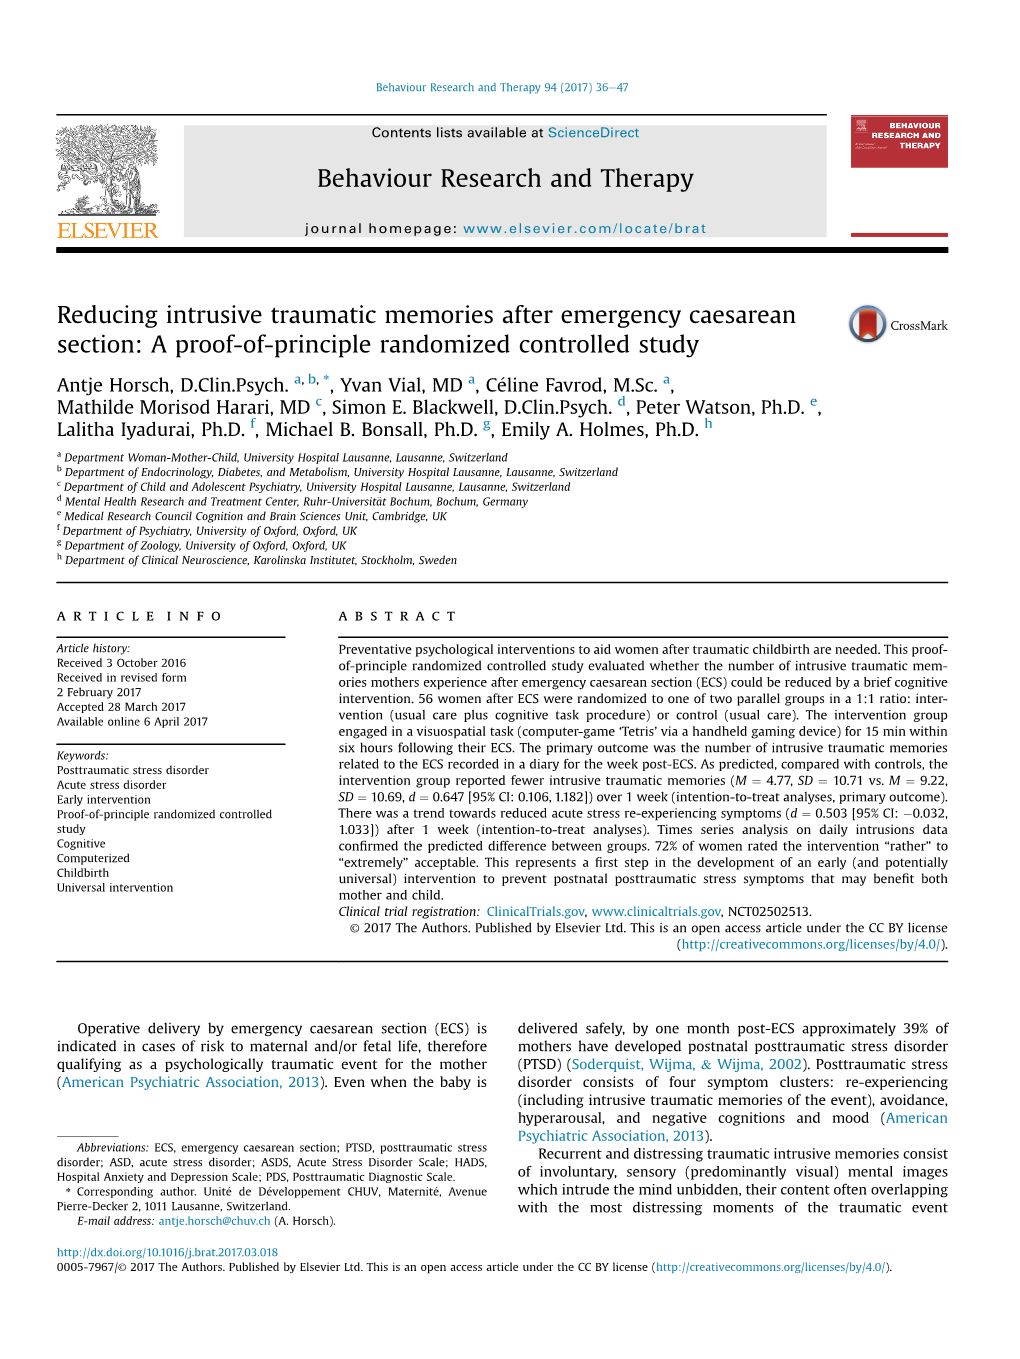 A Proof-Of-Principle Randomized Controlled Study